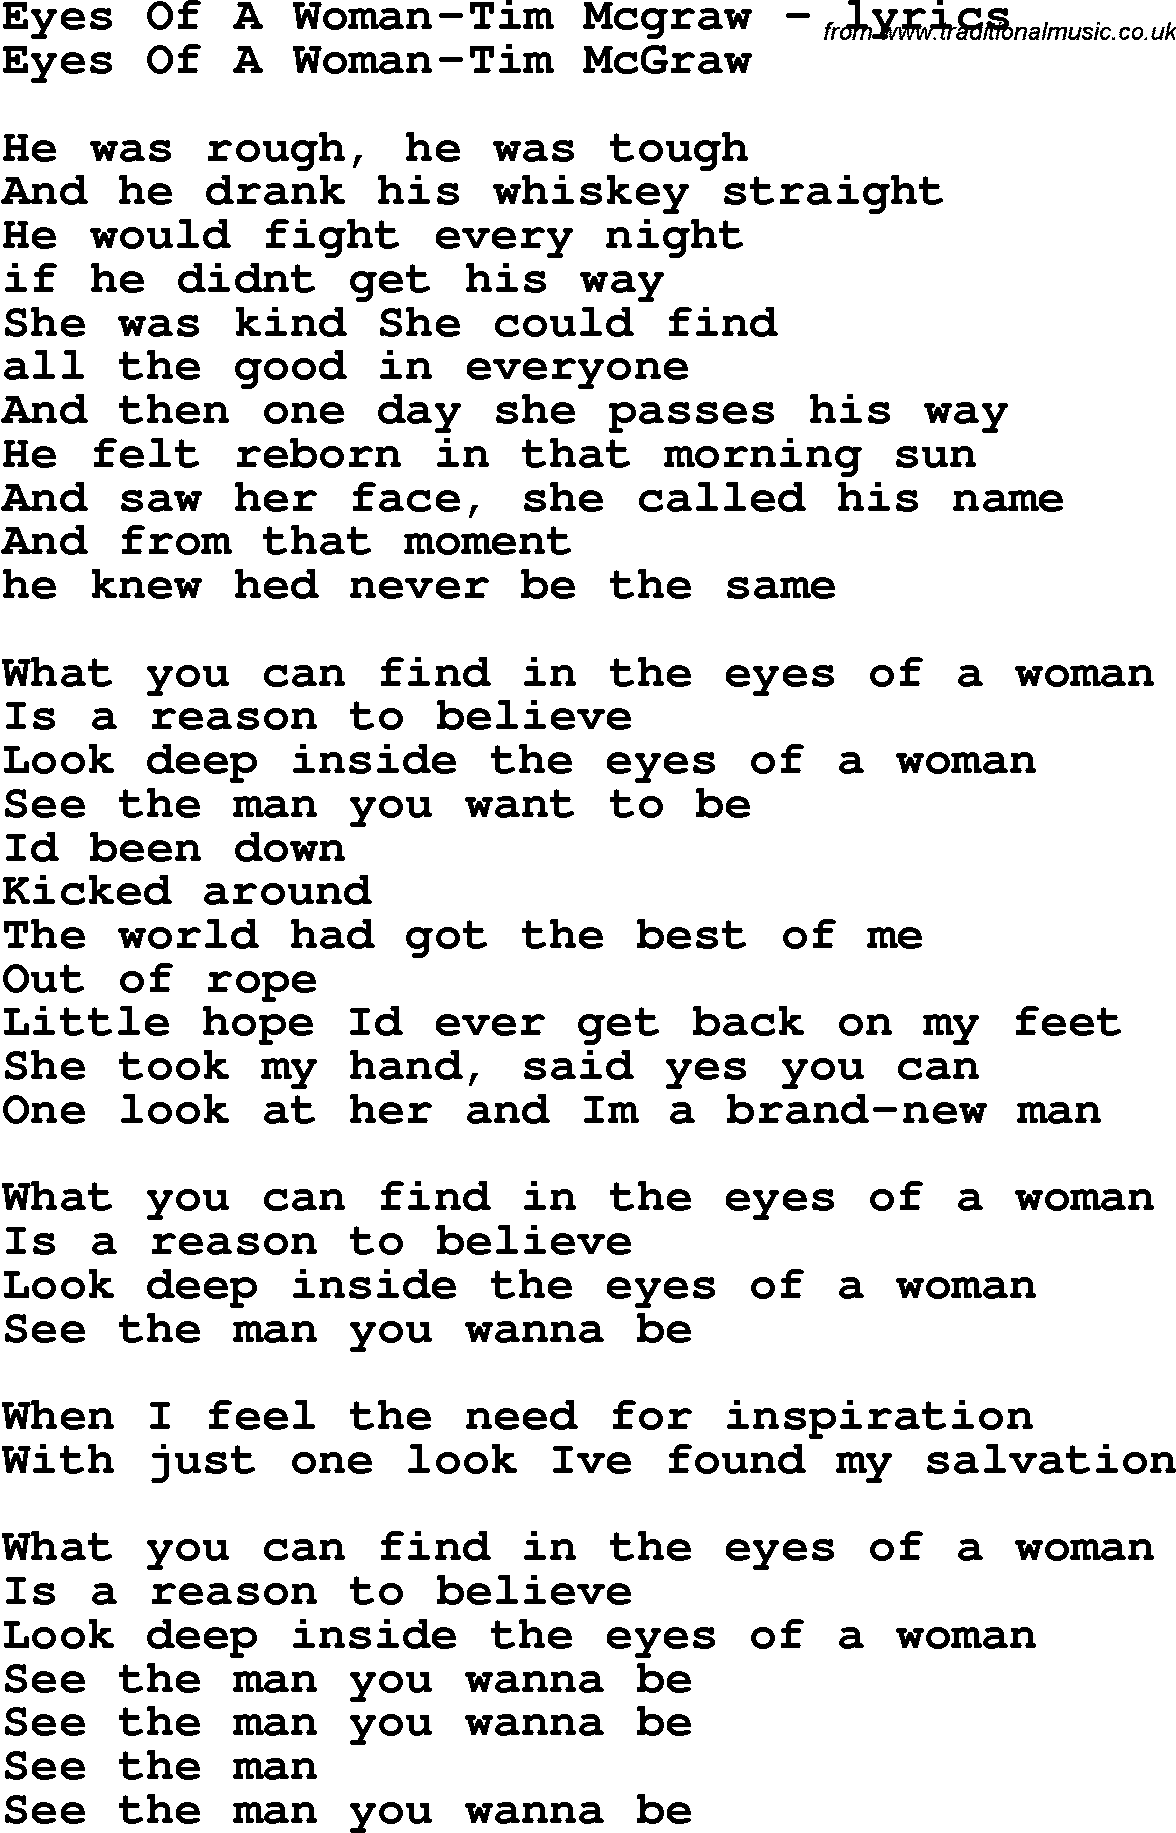 Love Song Lyrics for: Eyes Of A Woman-Tim Mcgraw